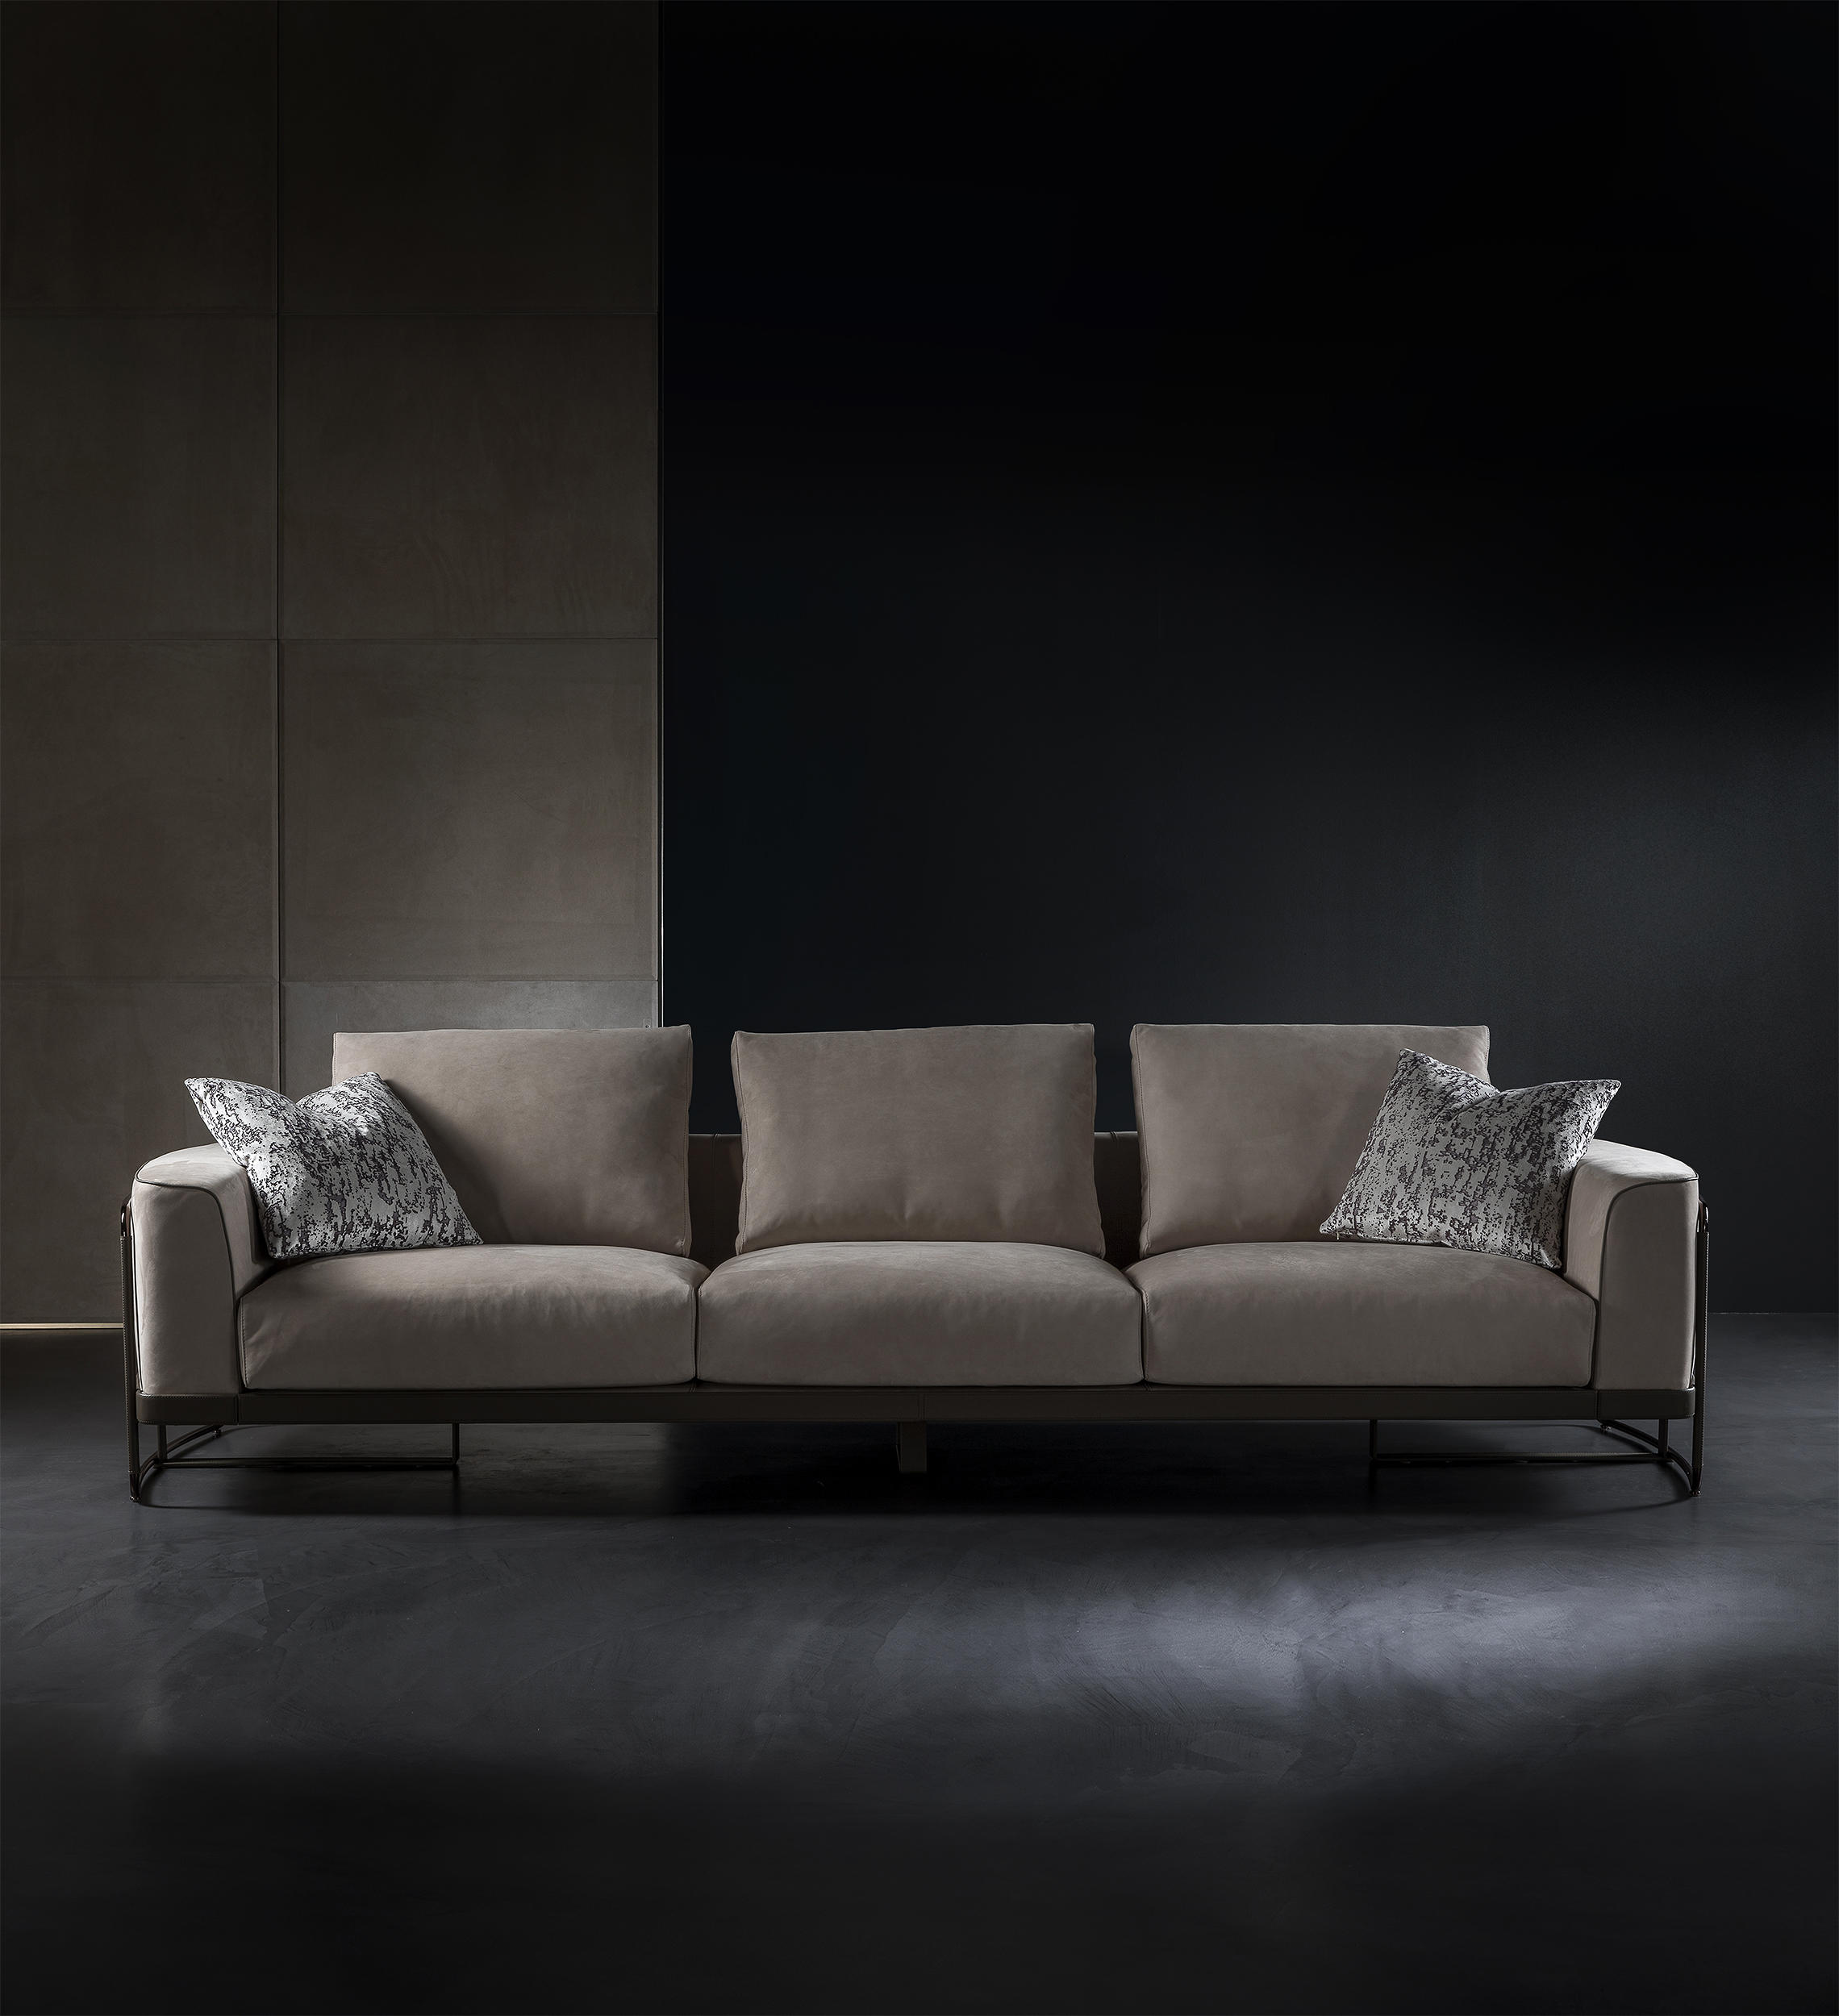 EDGAR - Sofas from Longhi S.p.a. | Architonic